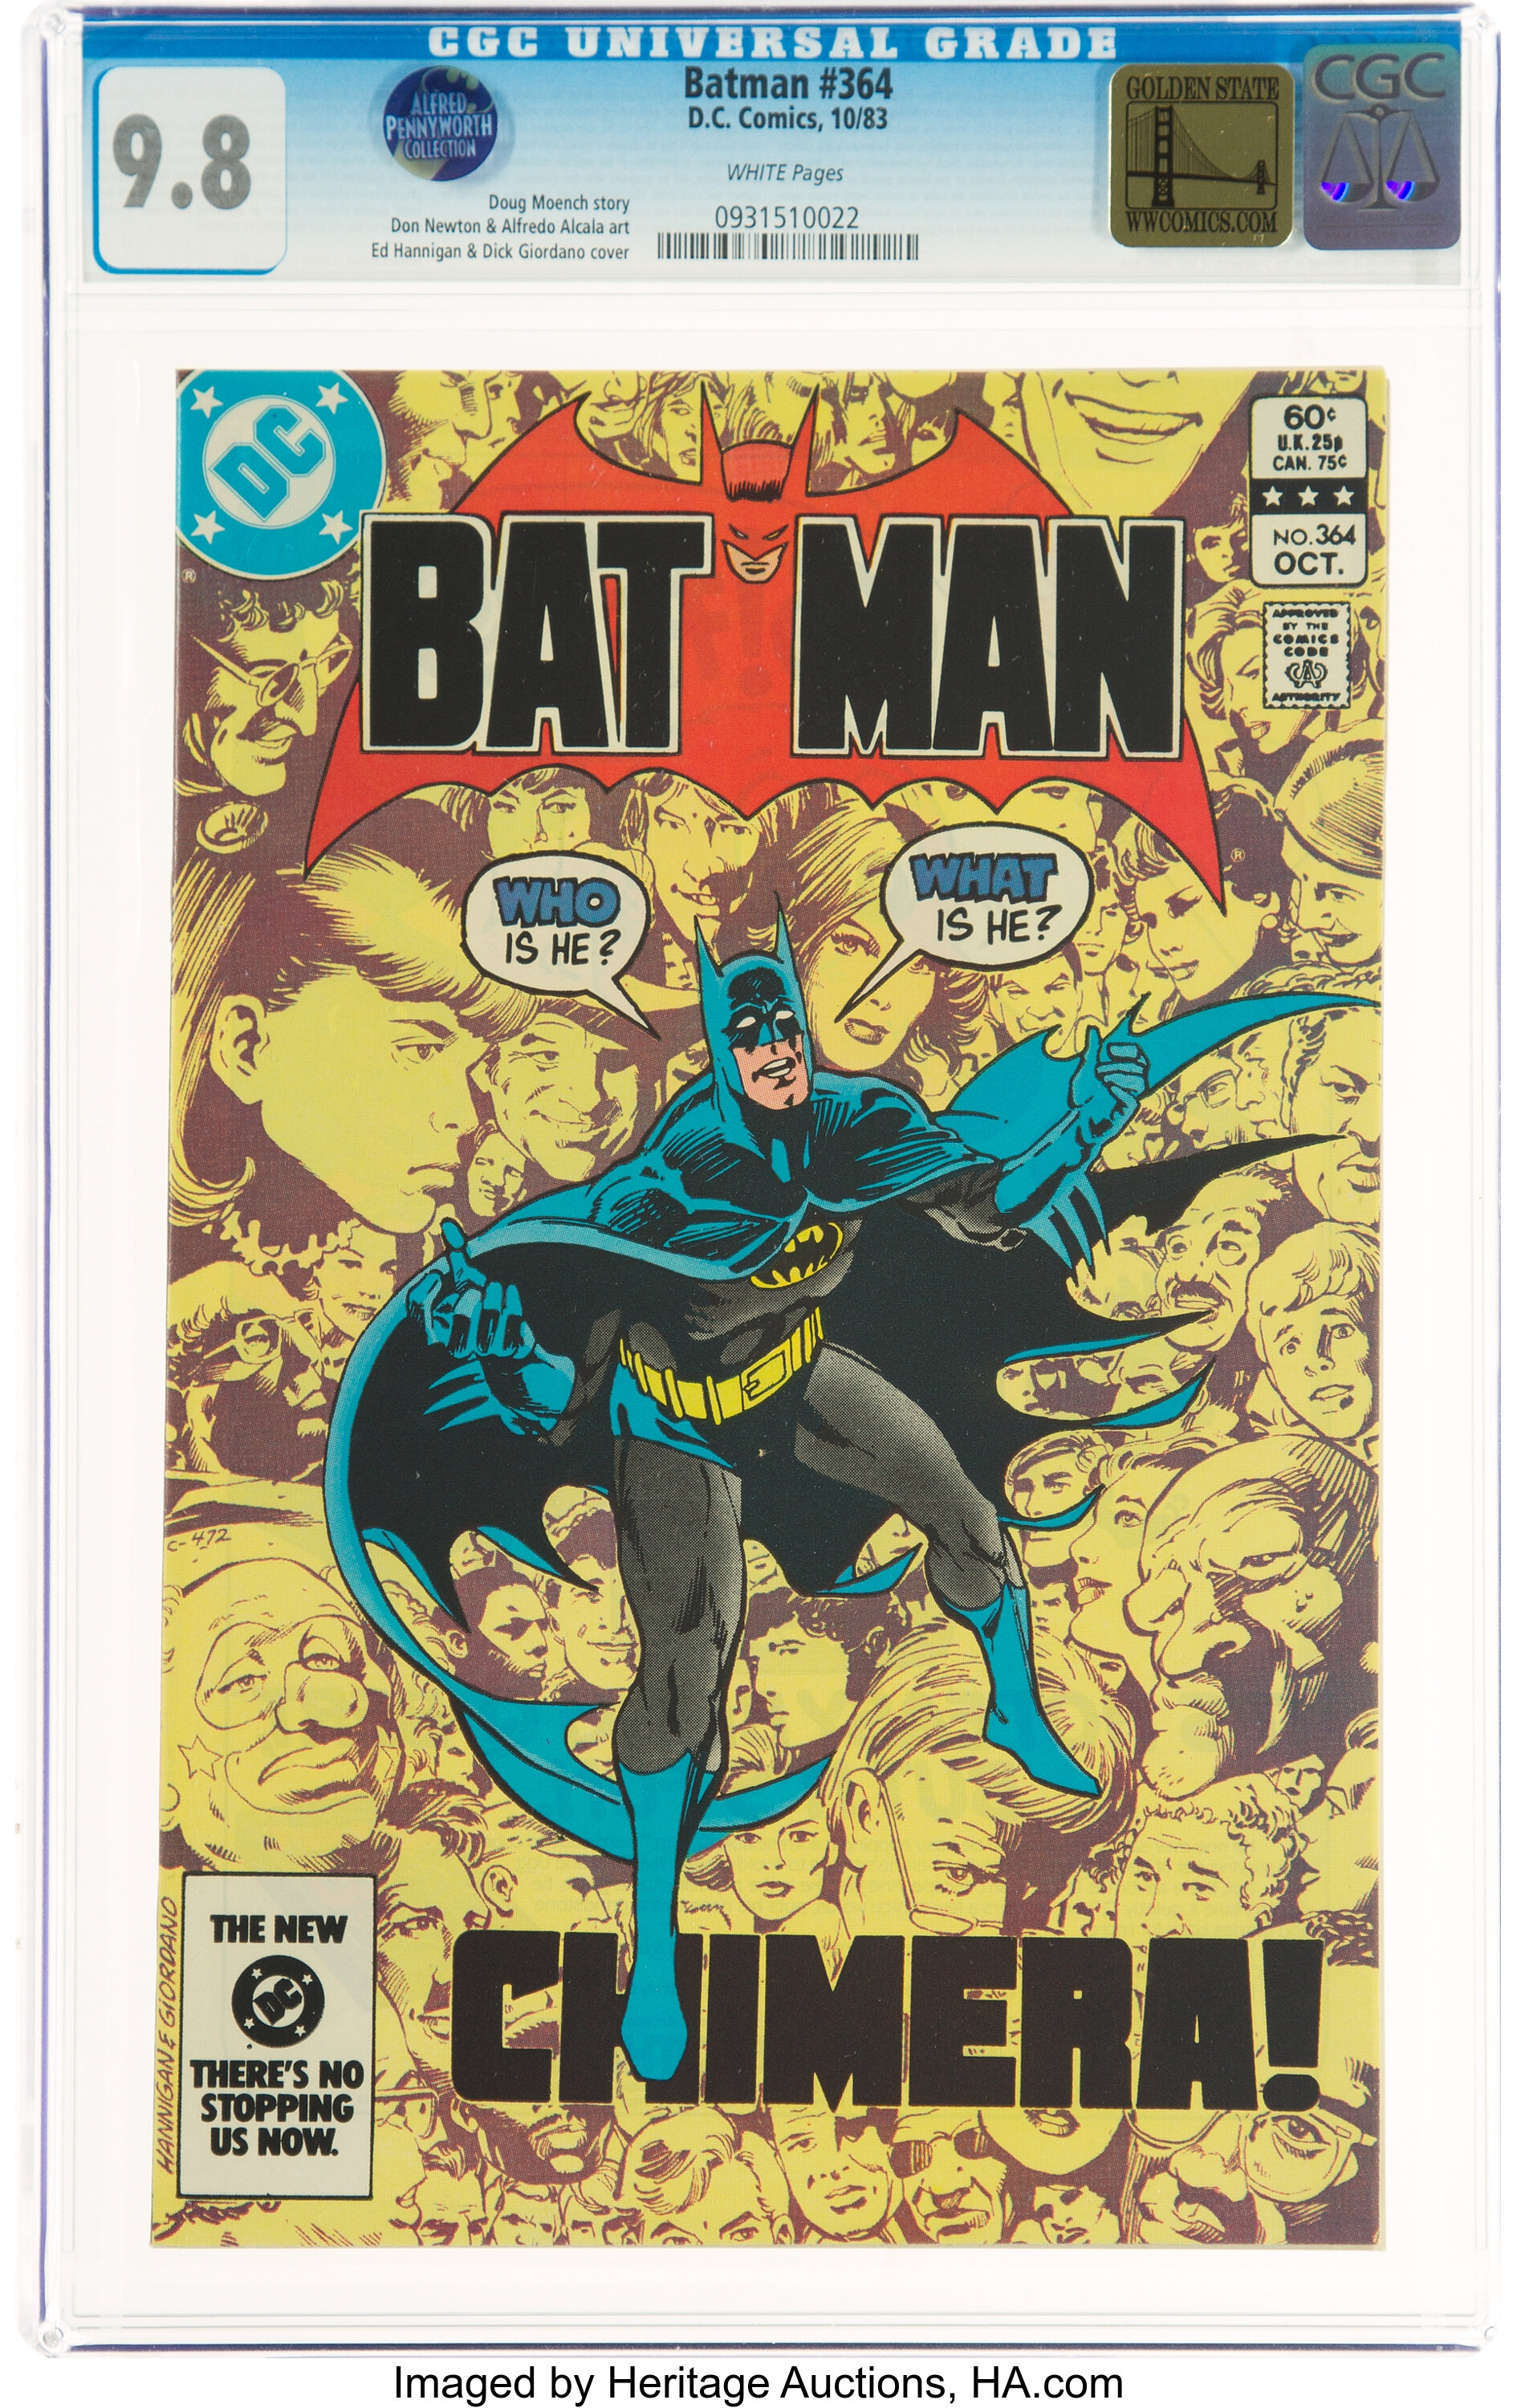 How Much Is Batman #364 Worth? Browse Comic Prices | Heritage Auctions